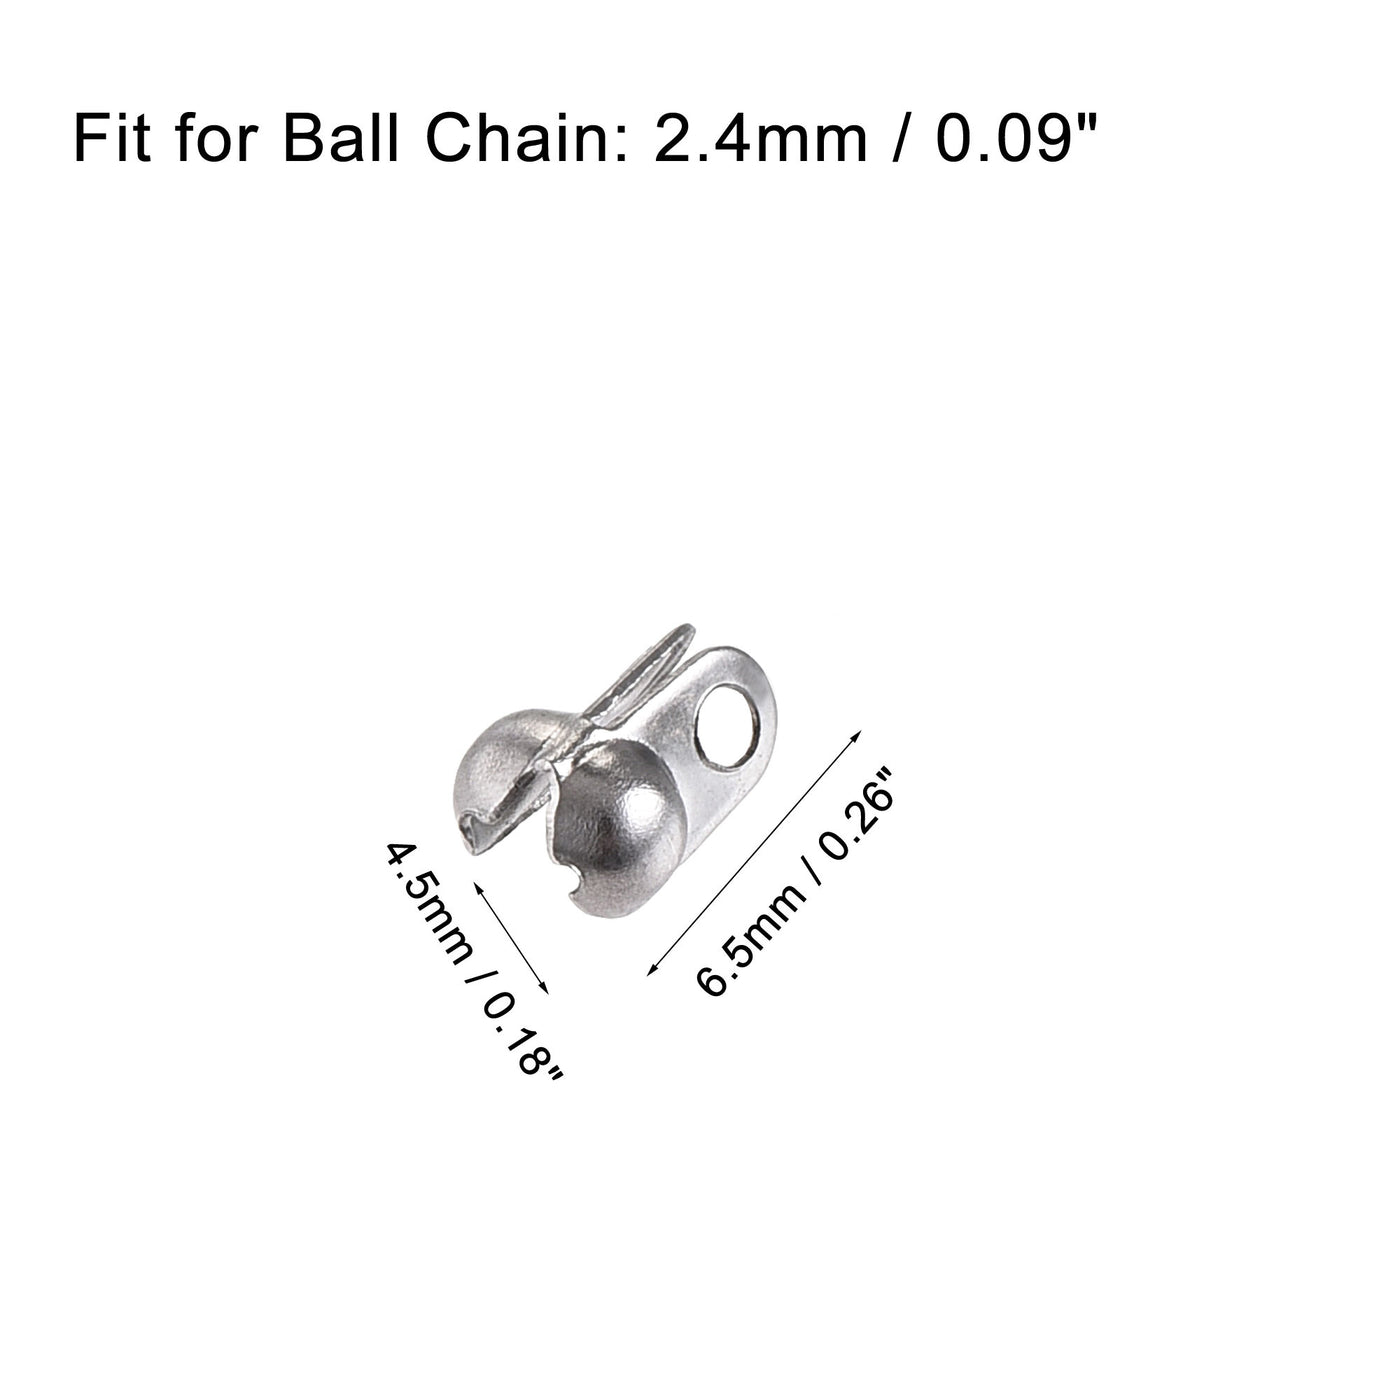 Uxcell Uxcell Ball Chain Connector, 2.4mm Ball Tips Clamshell Style Crimp Link Stainless Steel Connection, Pack of 100